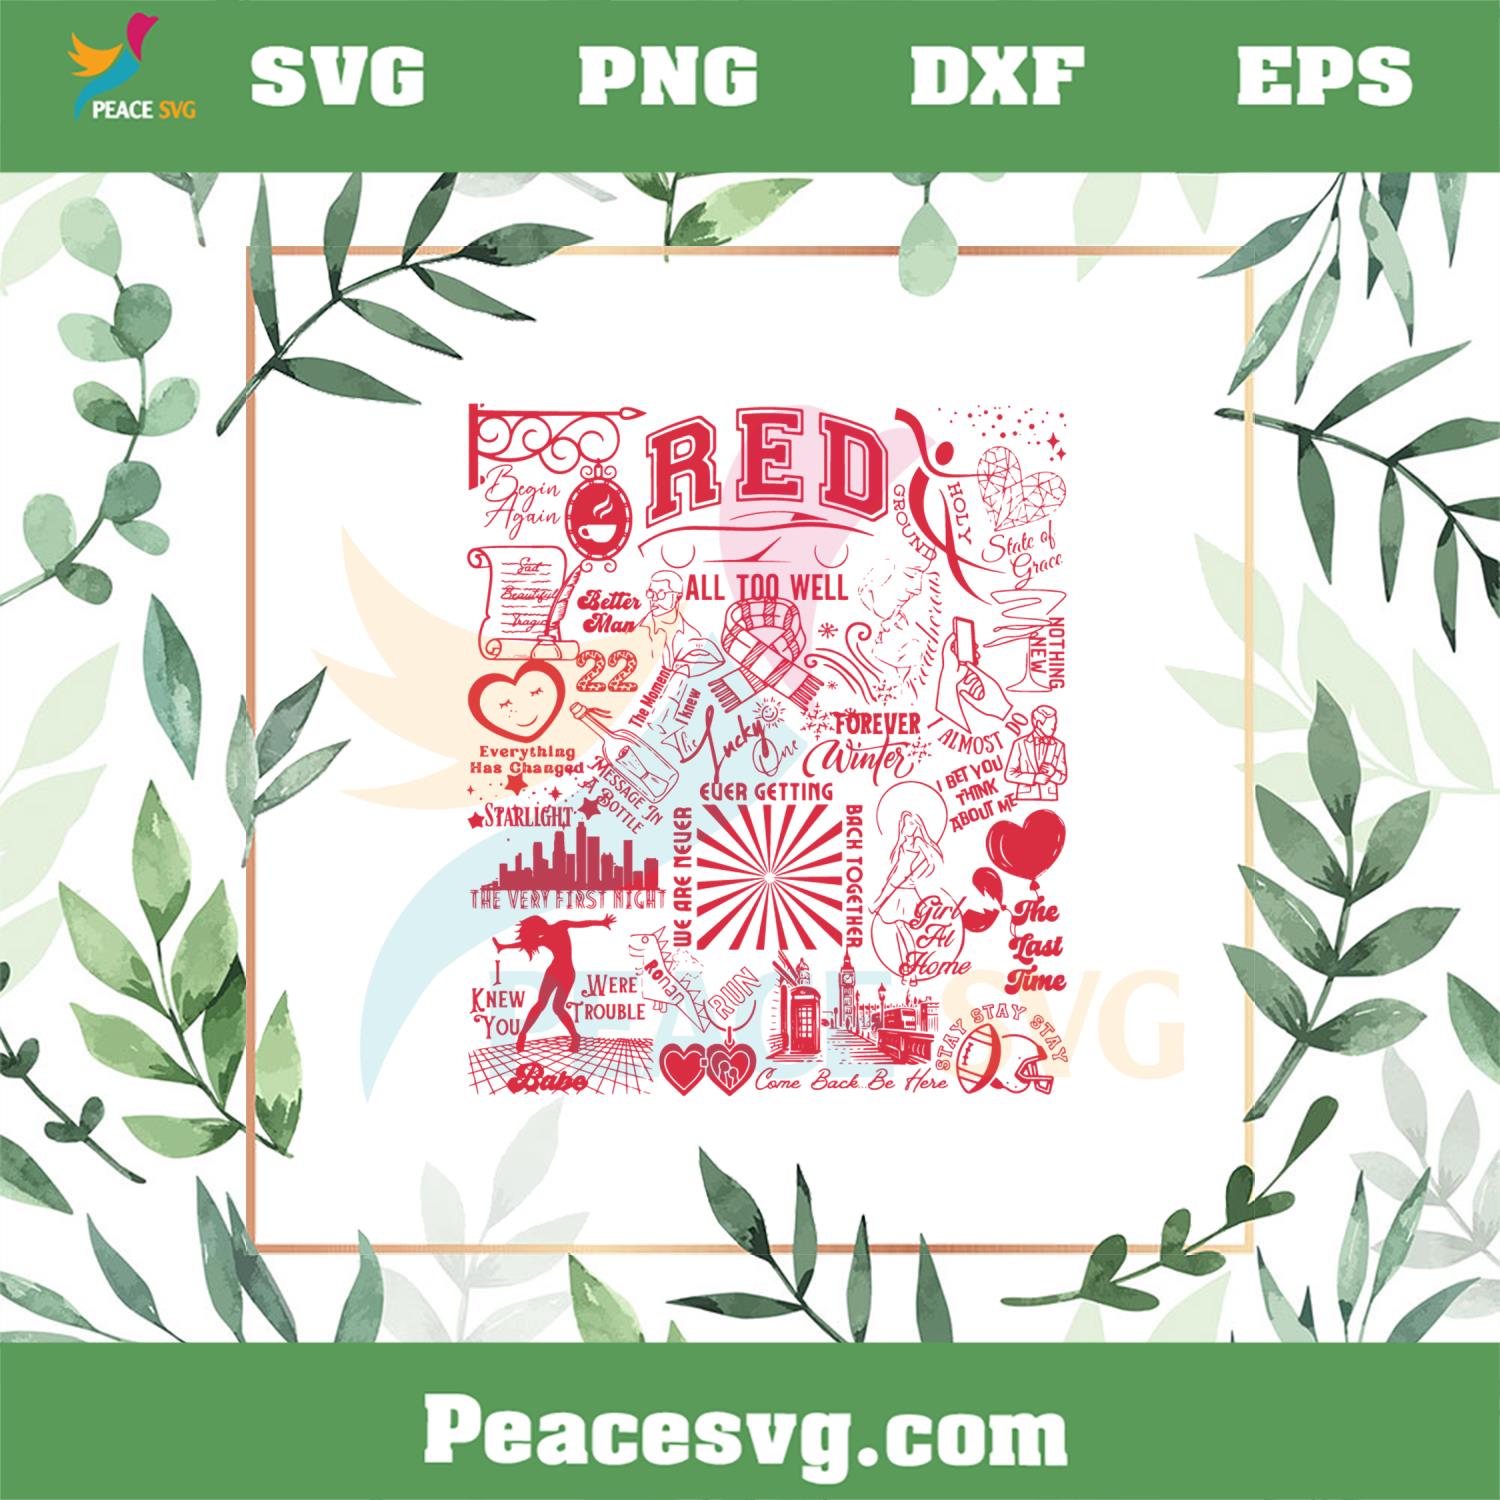 RED Taylor Swift Album Taylor Swift Song SVG Cutting Files